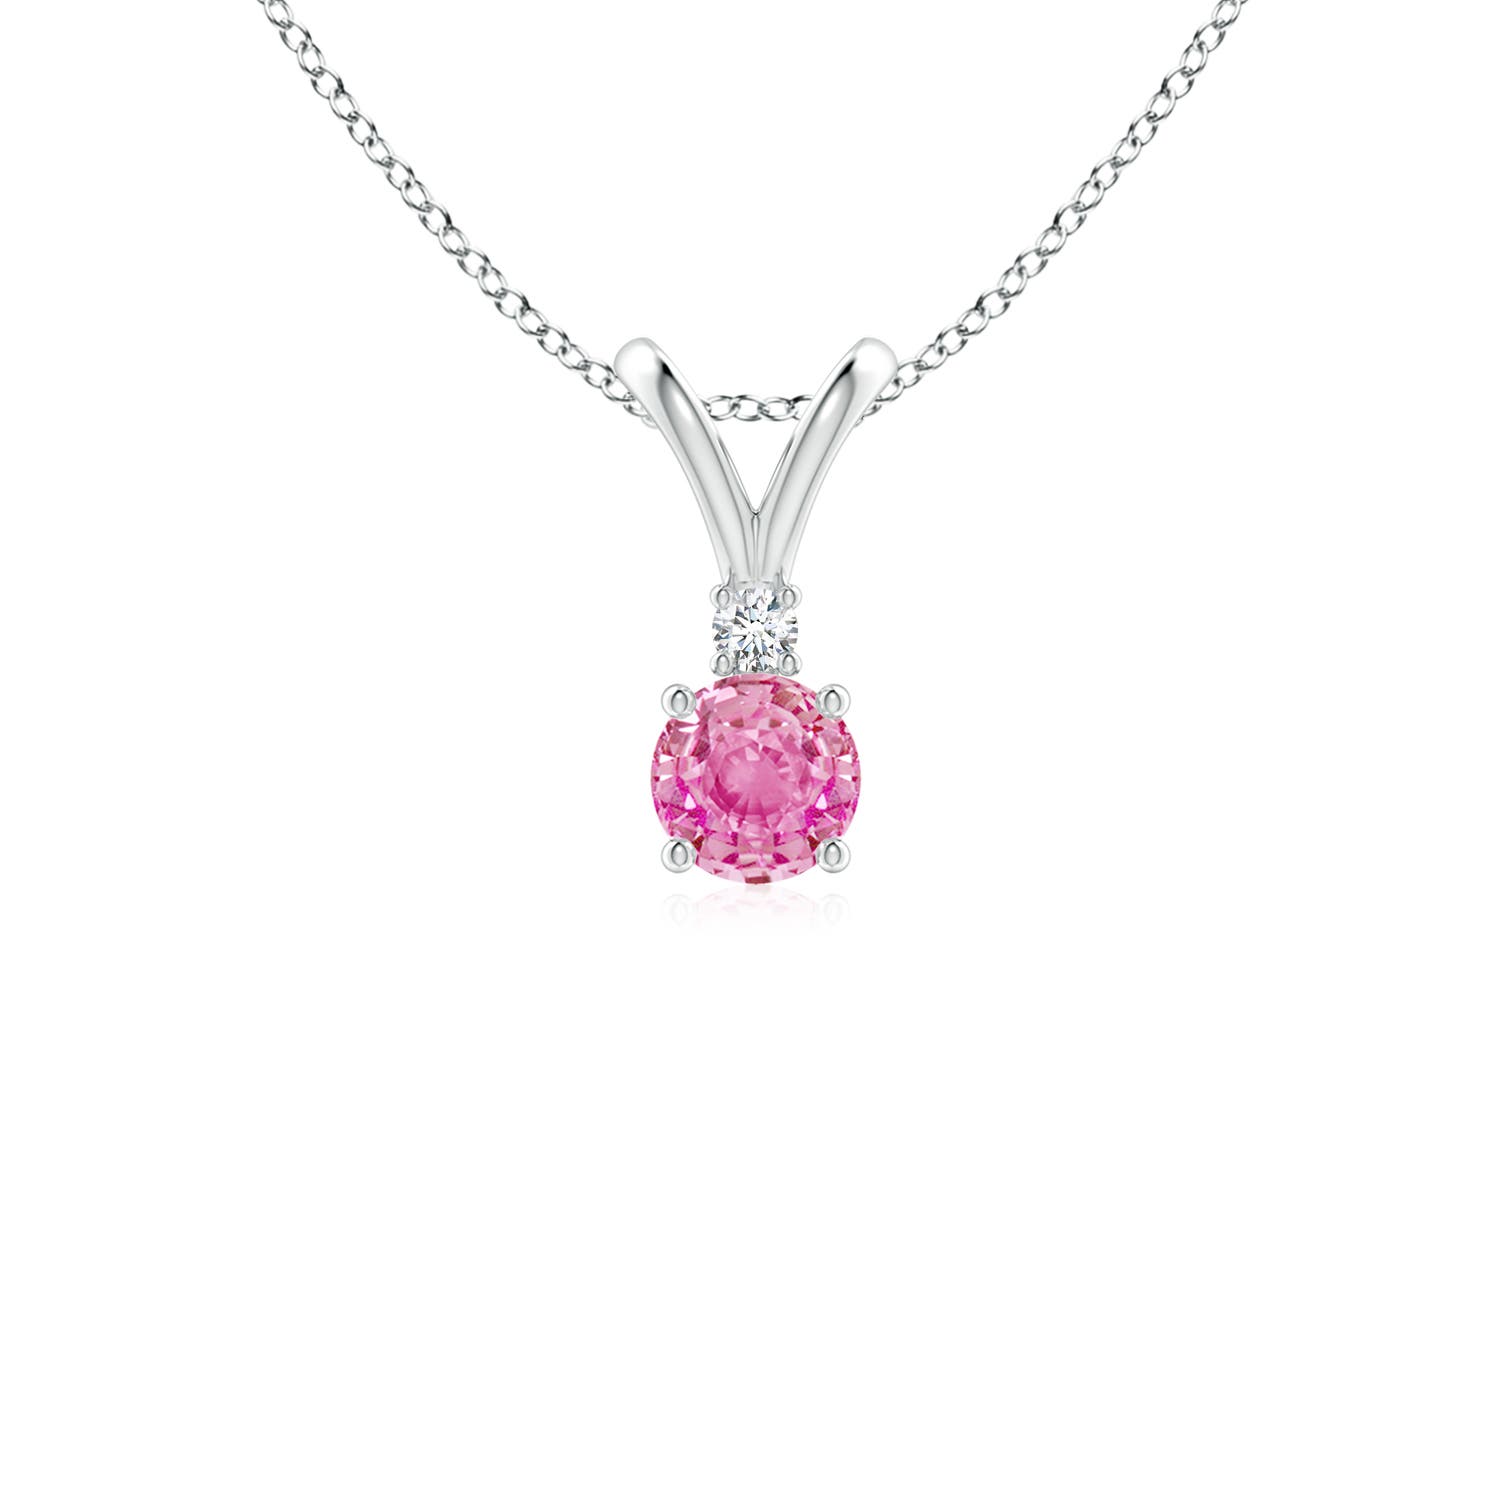 AA - Pink Sapphire / 0.34 CT / 14 KT White Gold